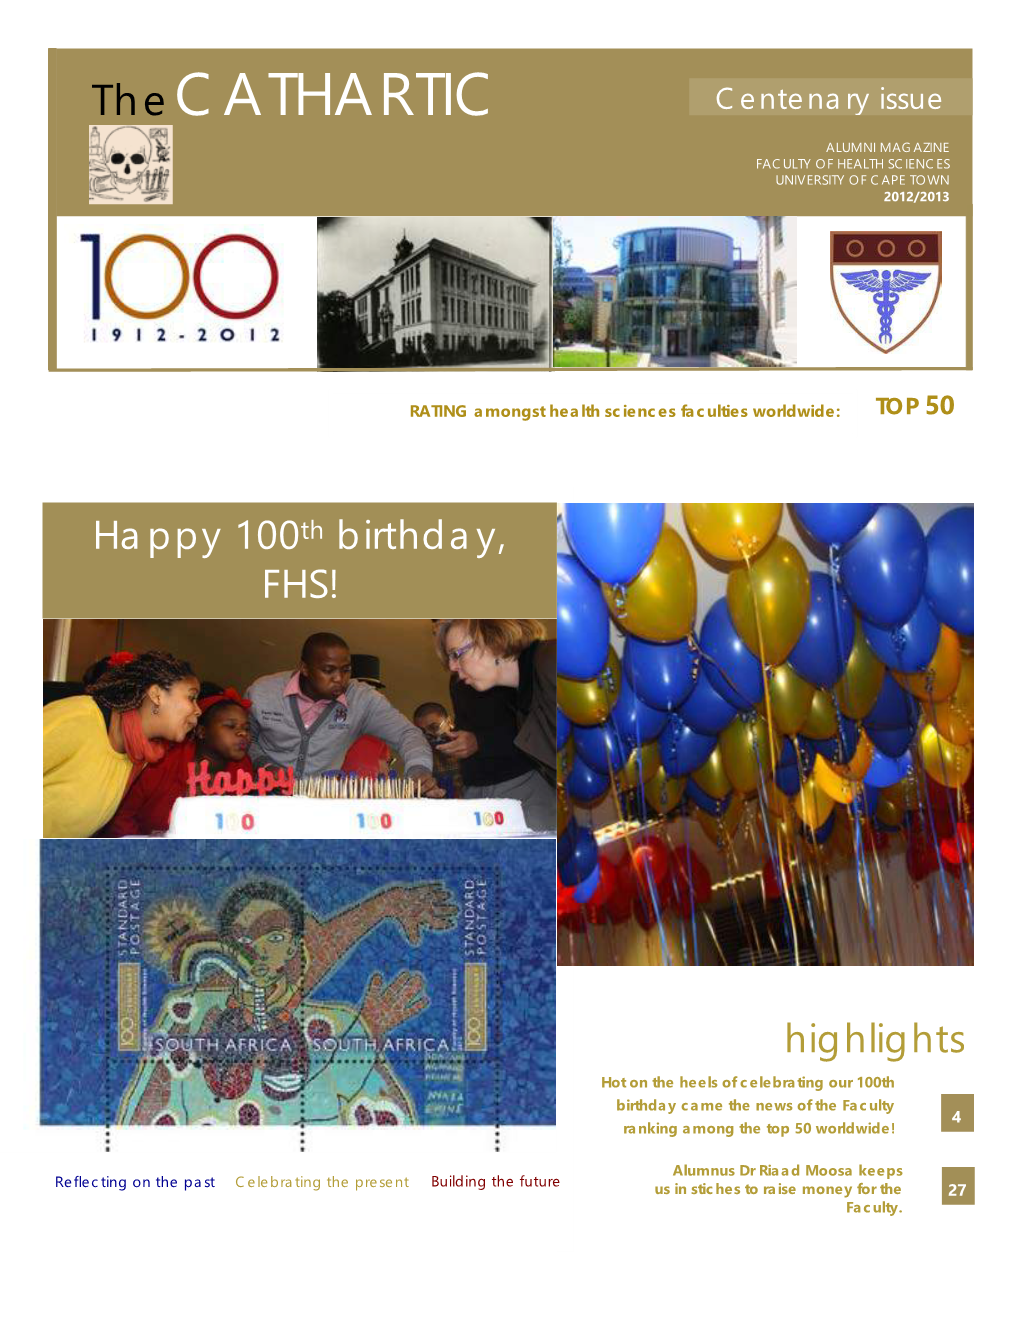 CATHARTIC Centenary Issue ALUMNI MAGAZINE FACULTY of HEALTH SCIENCES UNIVERSITY of CAPE TOWN 2012/2013